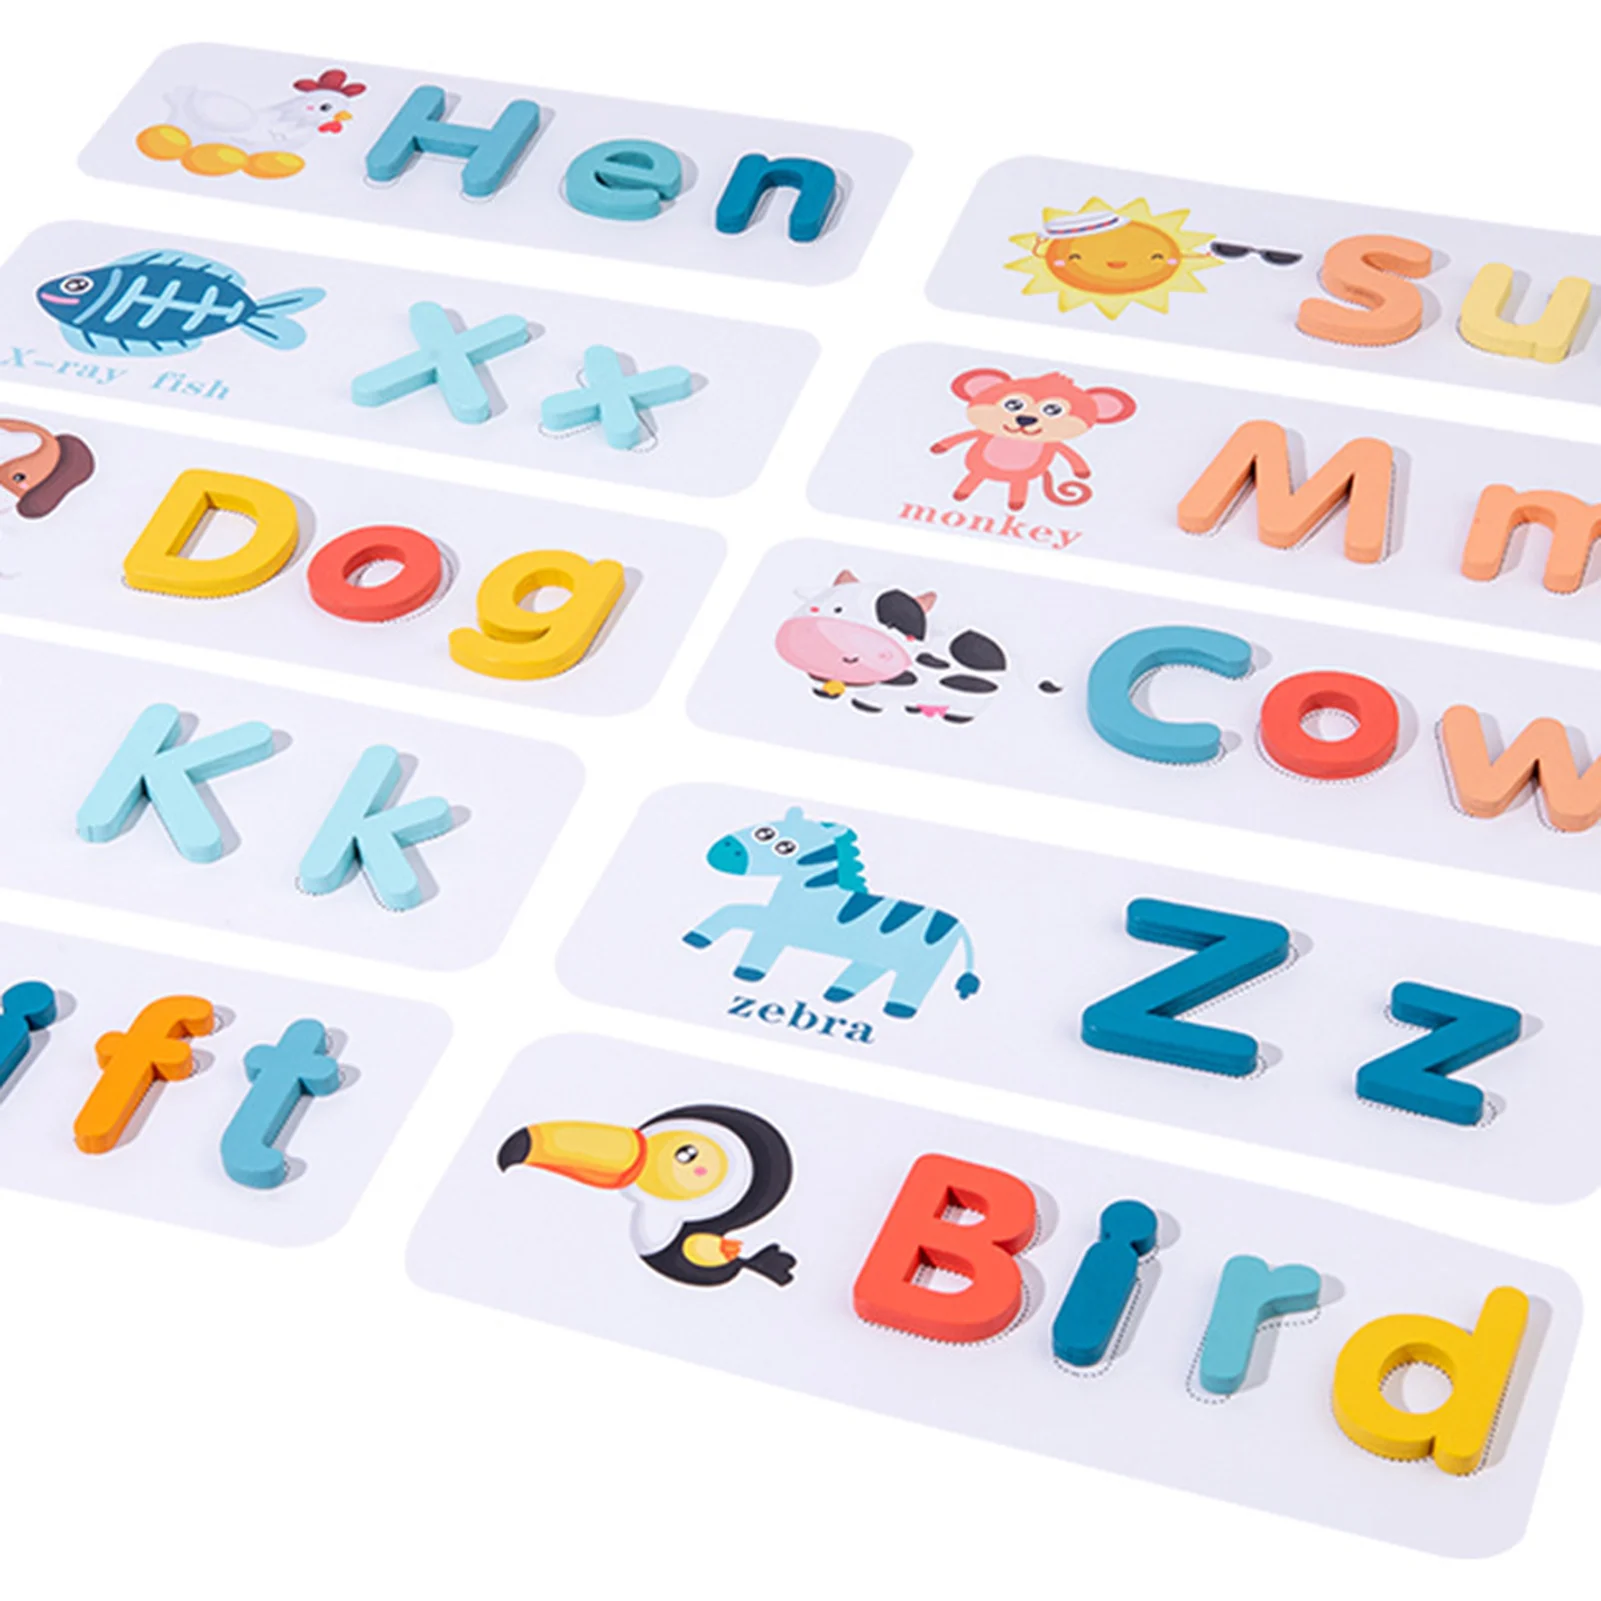 

Montessori Wooden Toys Words Spelling Game 26 English Letters Pattern Cognition Building Blocks Alphabet Wood Puzzle Baby Toys